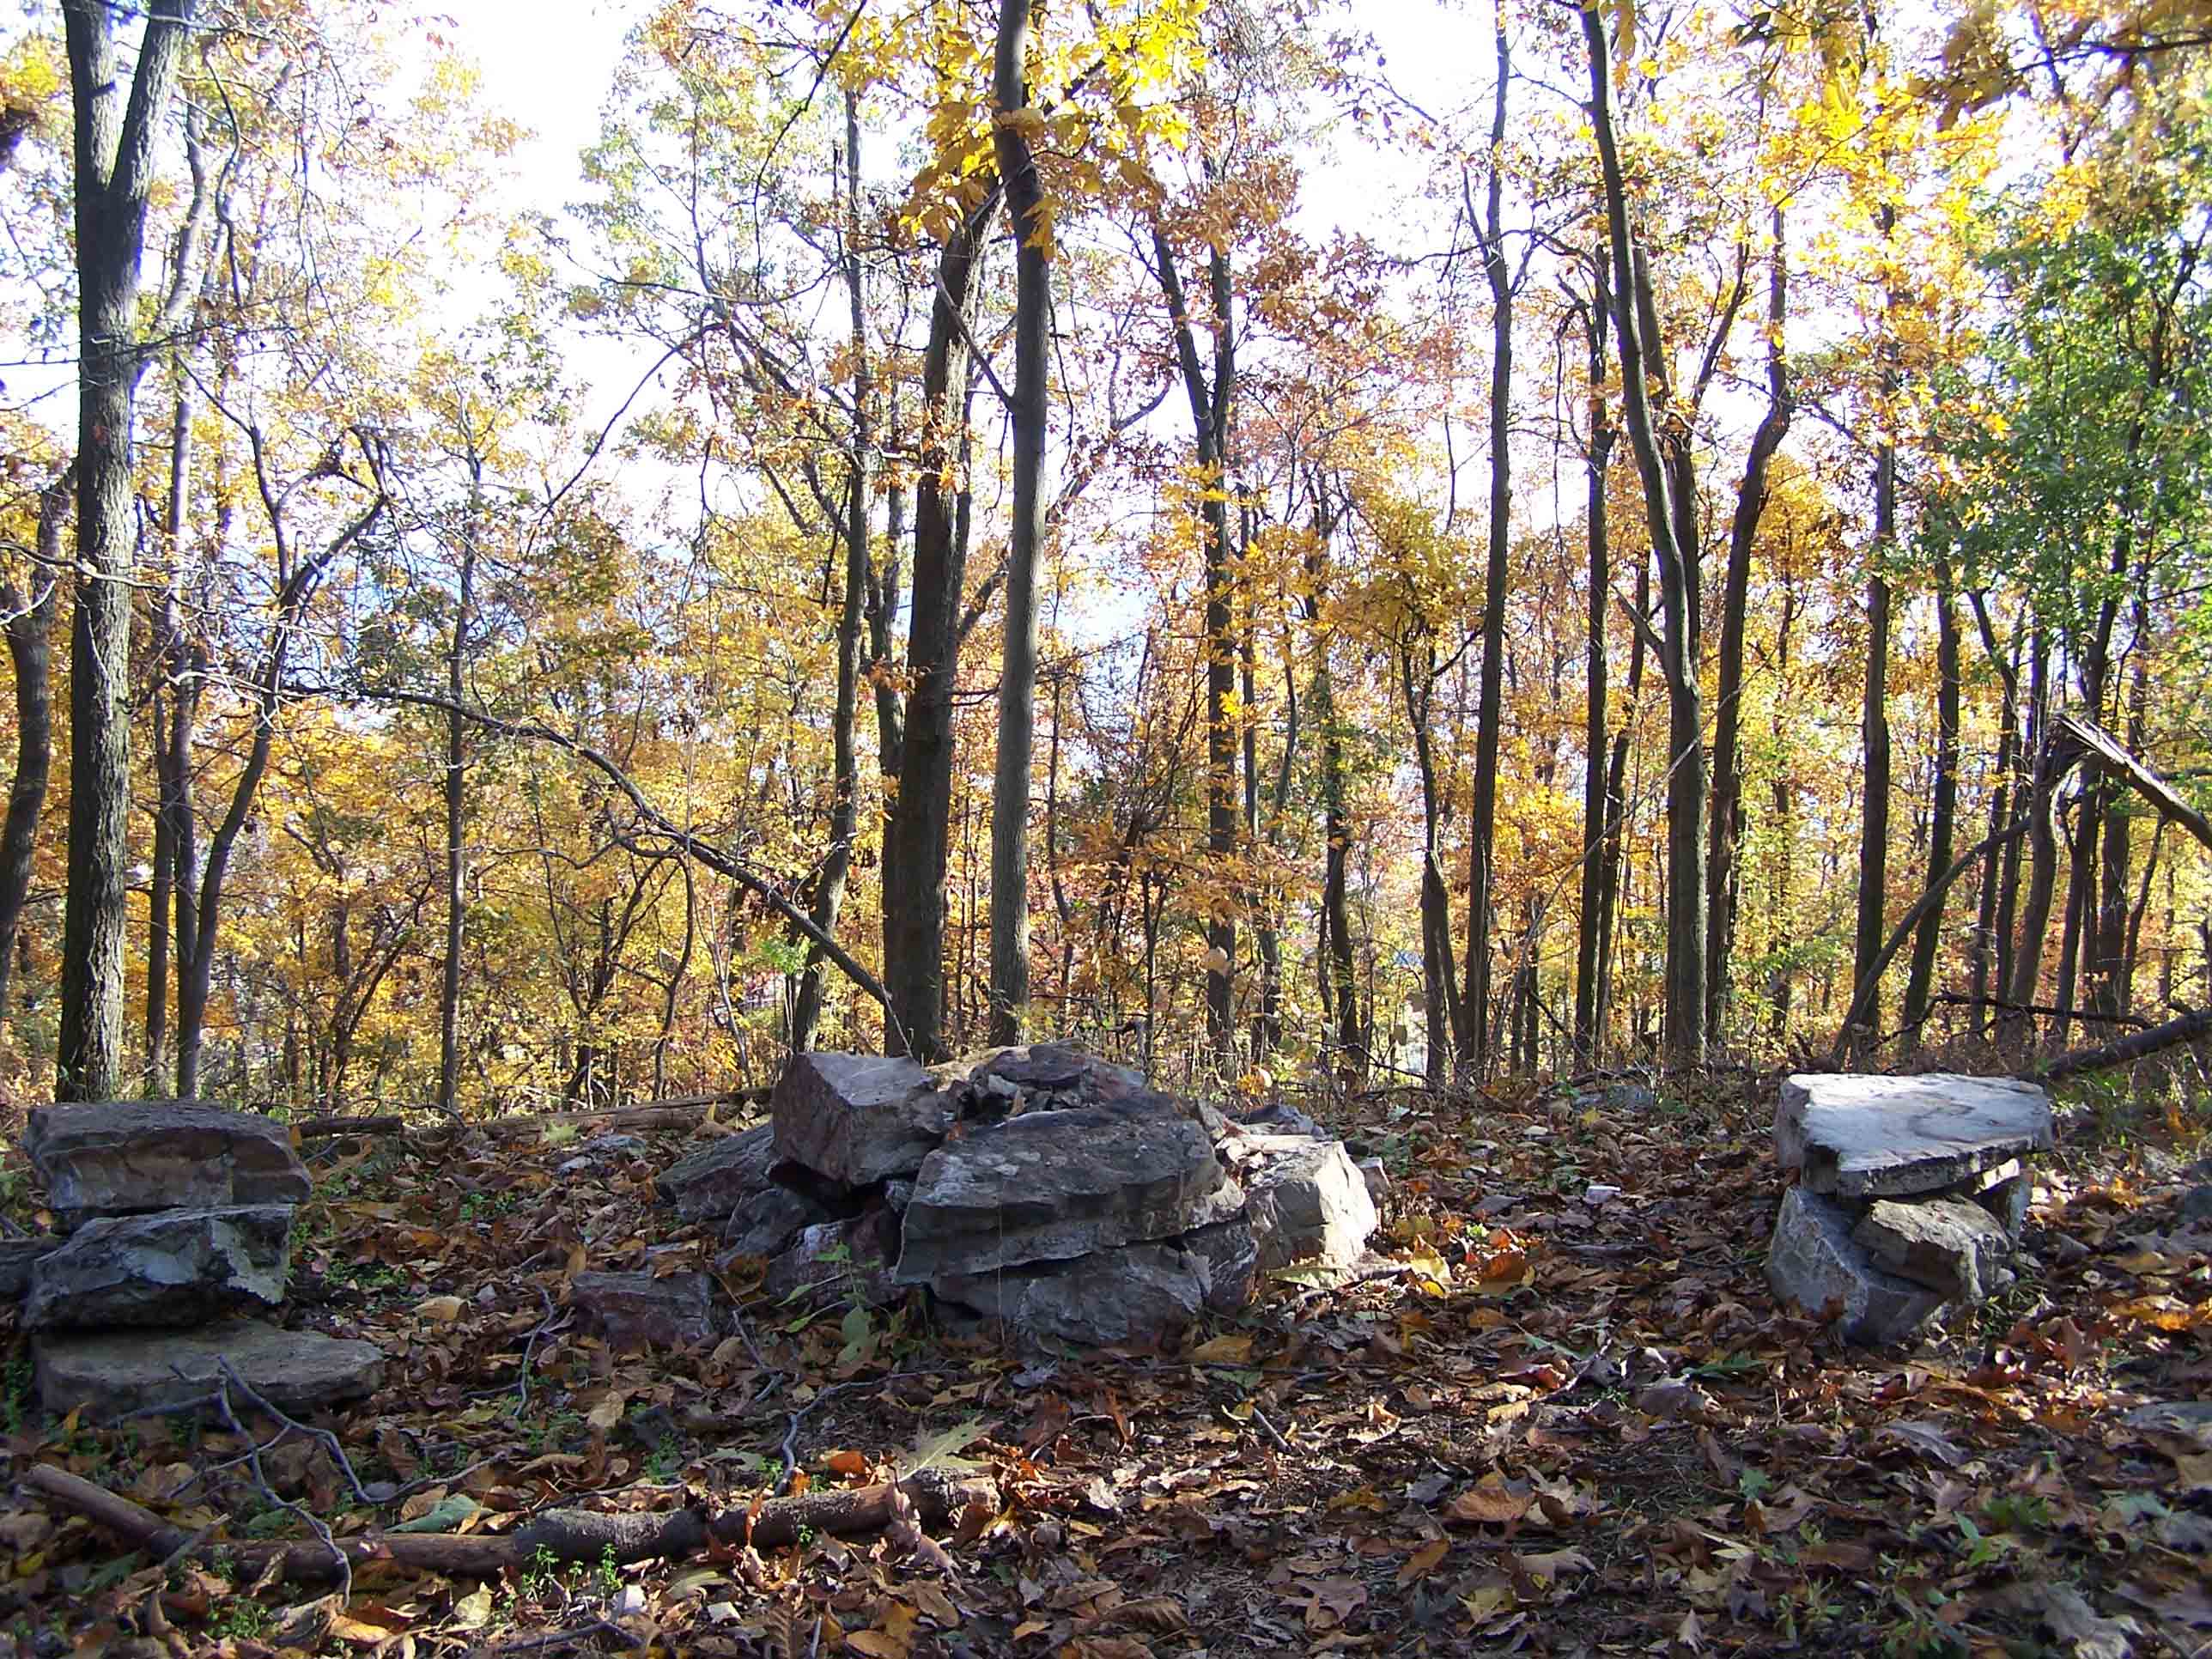 Campsite north of blue-blazed trail to Hawk Mountain Sanctuary. Courtesy at@rohland.org